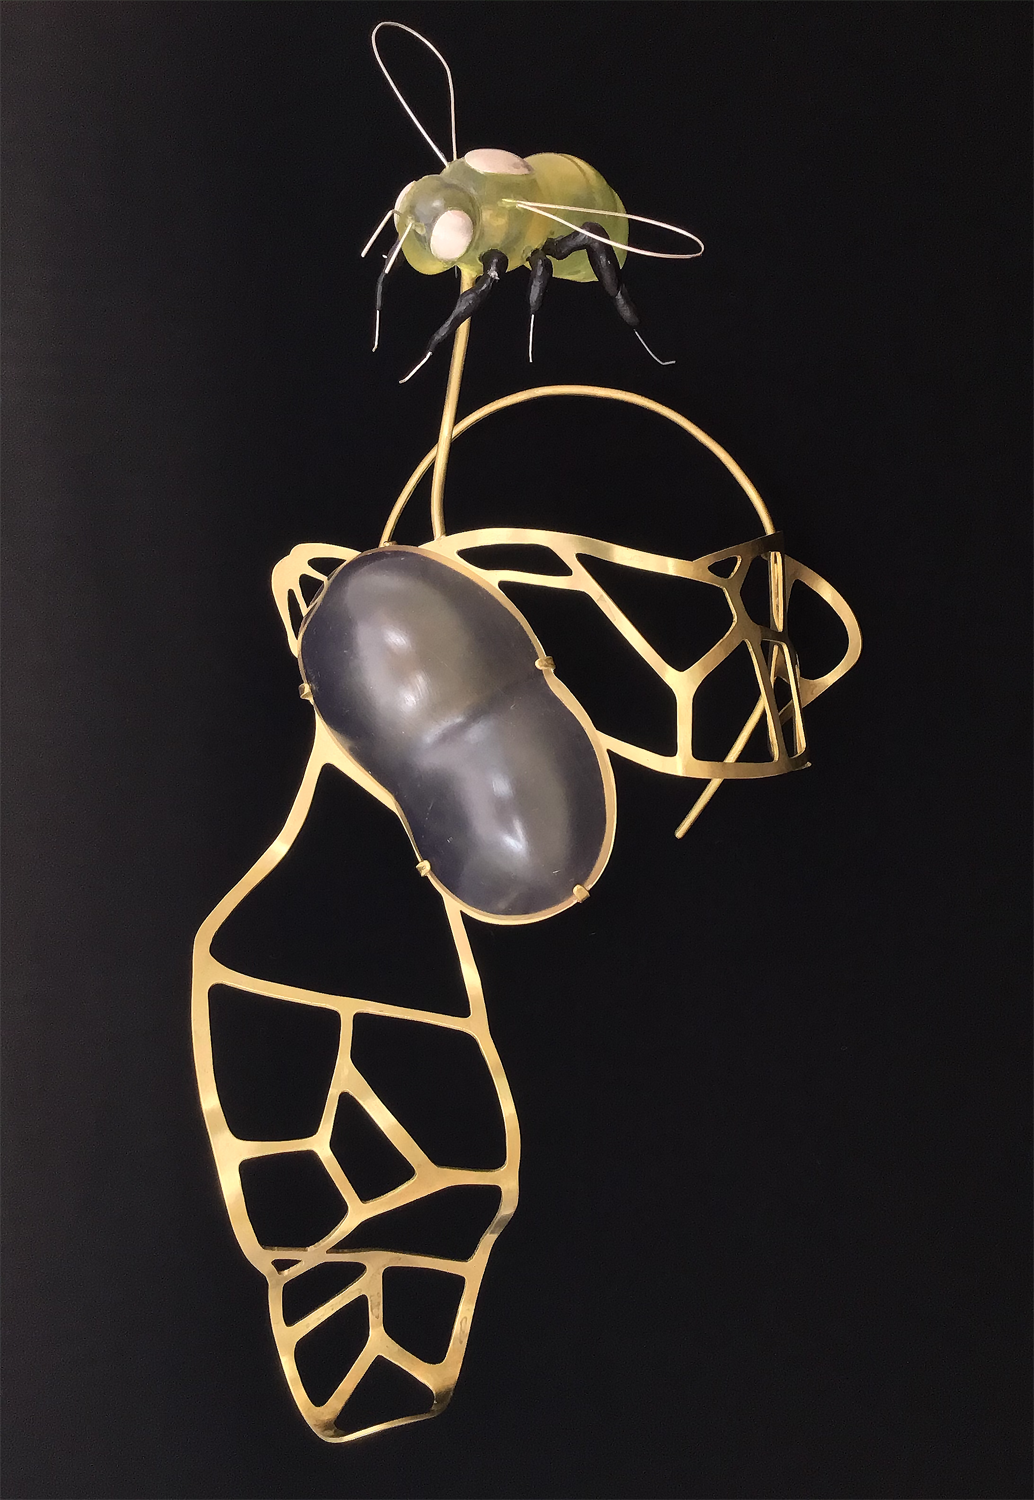 A queen bee hovers over an abstract brass form. The brass form resembles wings; they both join a translucent and elongated eye-like form. 